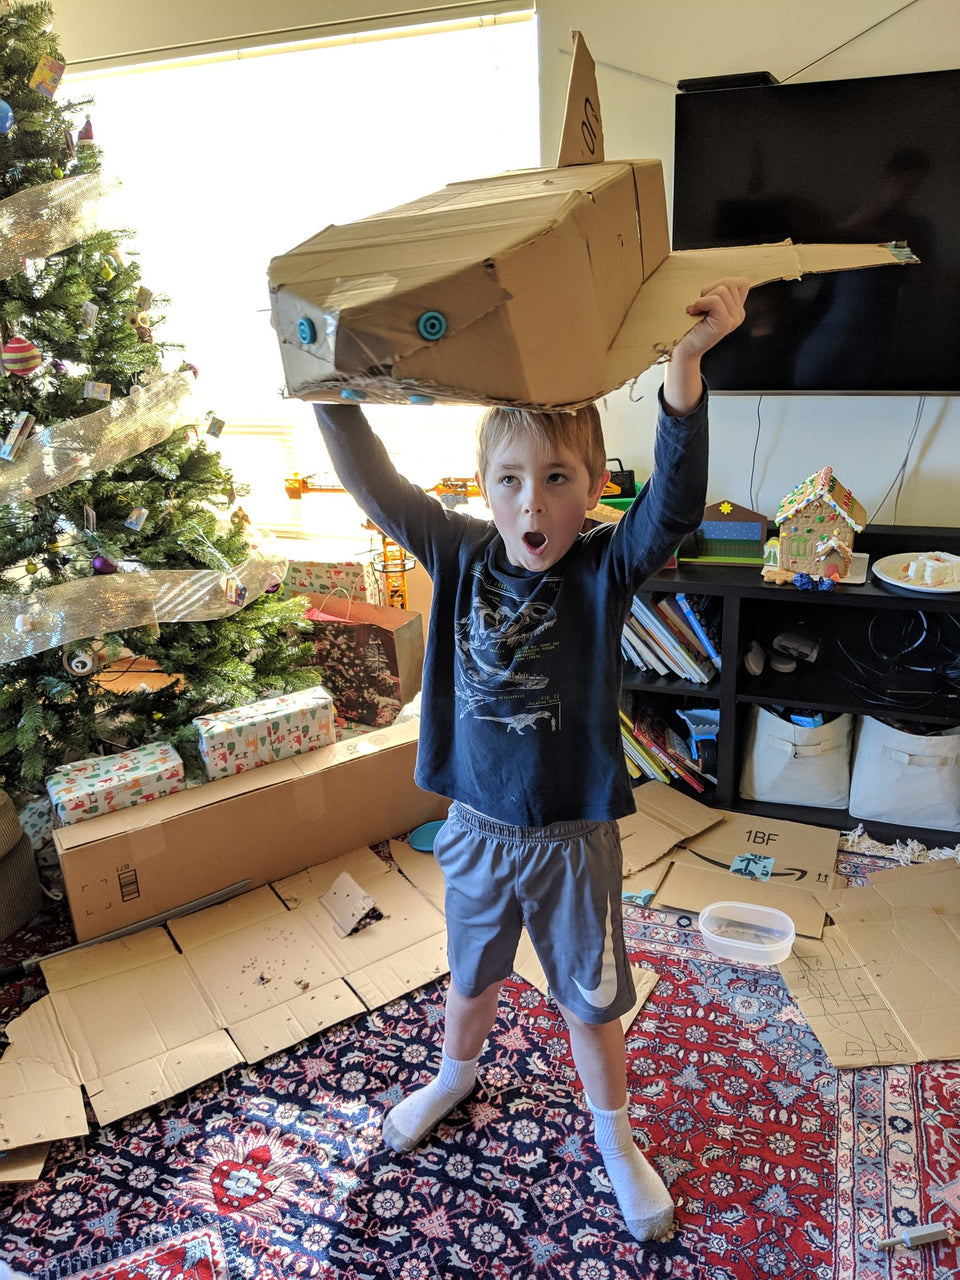 Ready for launch - the cardboard space shuttle made with Makedo